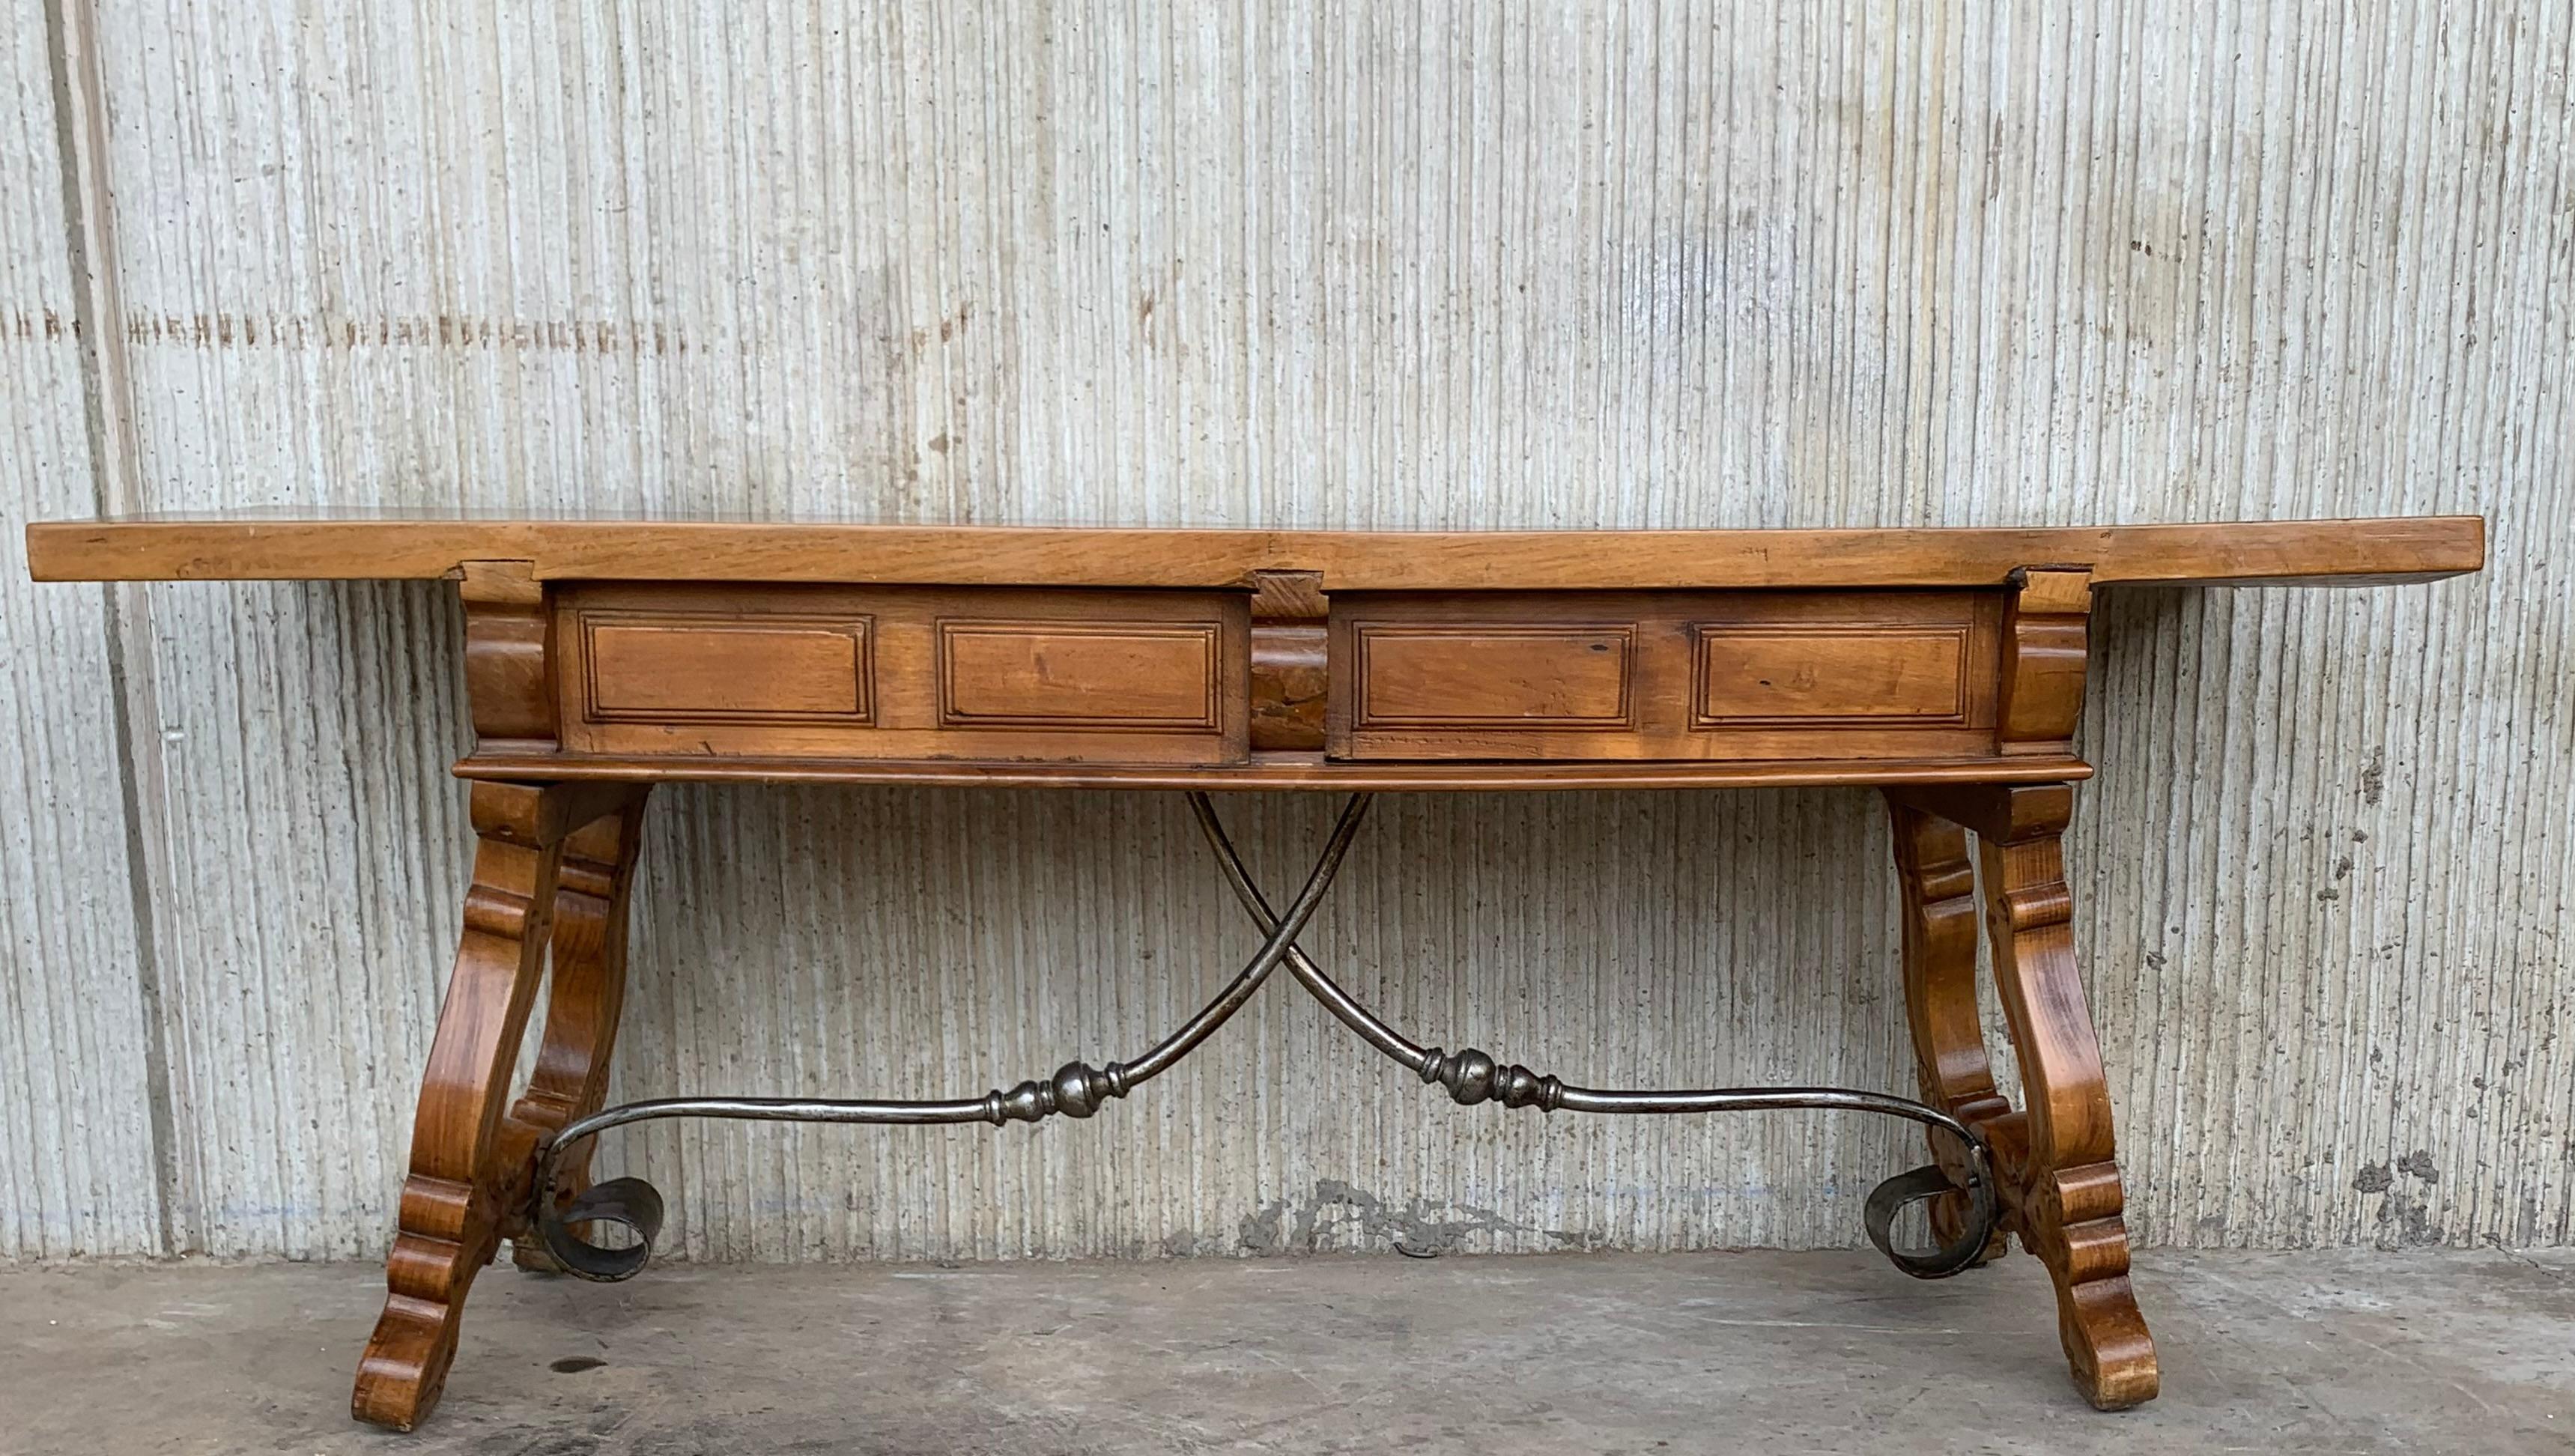 Spanish Bench or Low Console Table with Drawers, Lyre Legs and Iron Stretcher For Sale 6